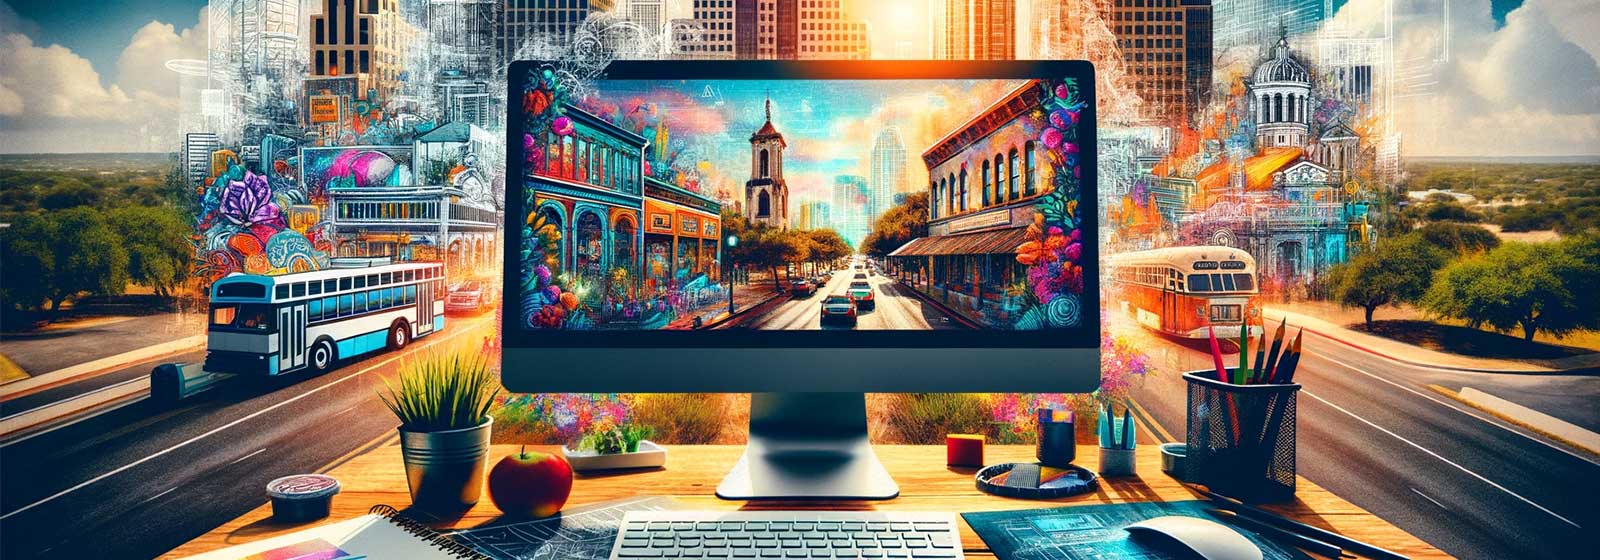 Web design workspace showcasing a San Antonio-themed website, blending iconic landmarks with digital design elements. Captures the integration of local culture into creative web solutions, highlighting San Antonio's influence on innovative design.